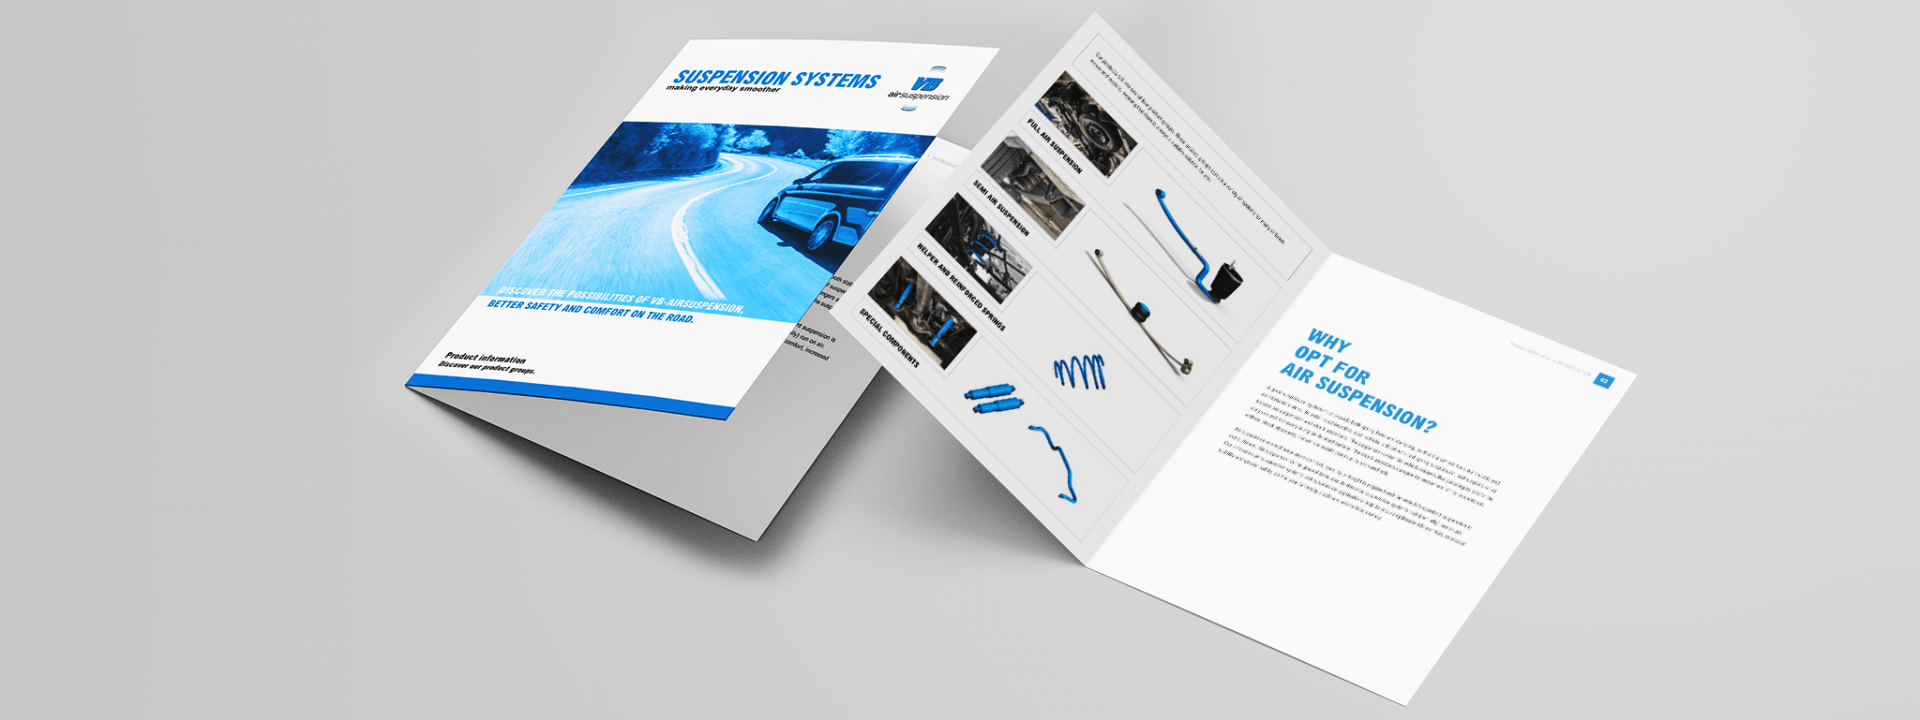 product information brochure